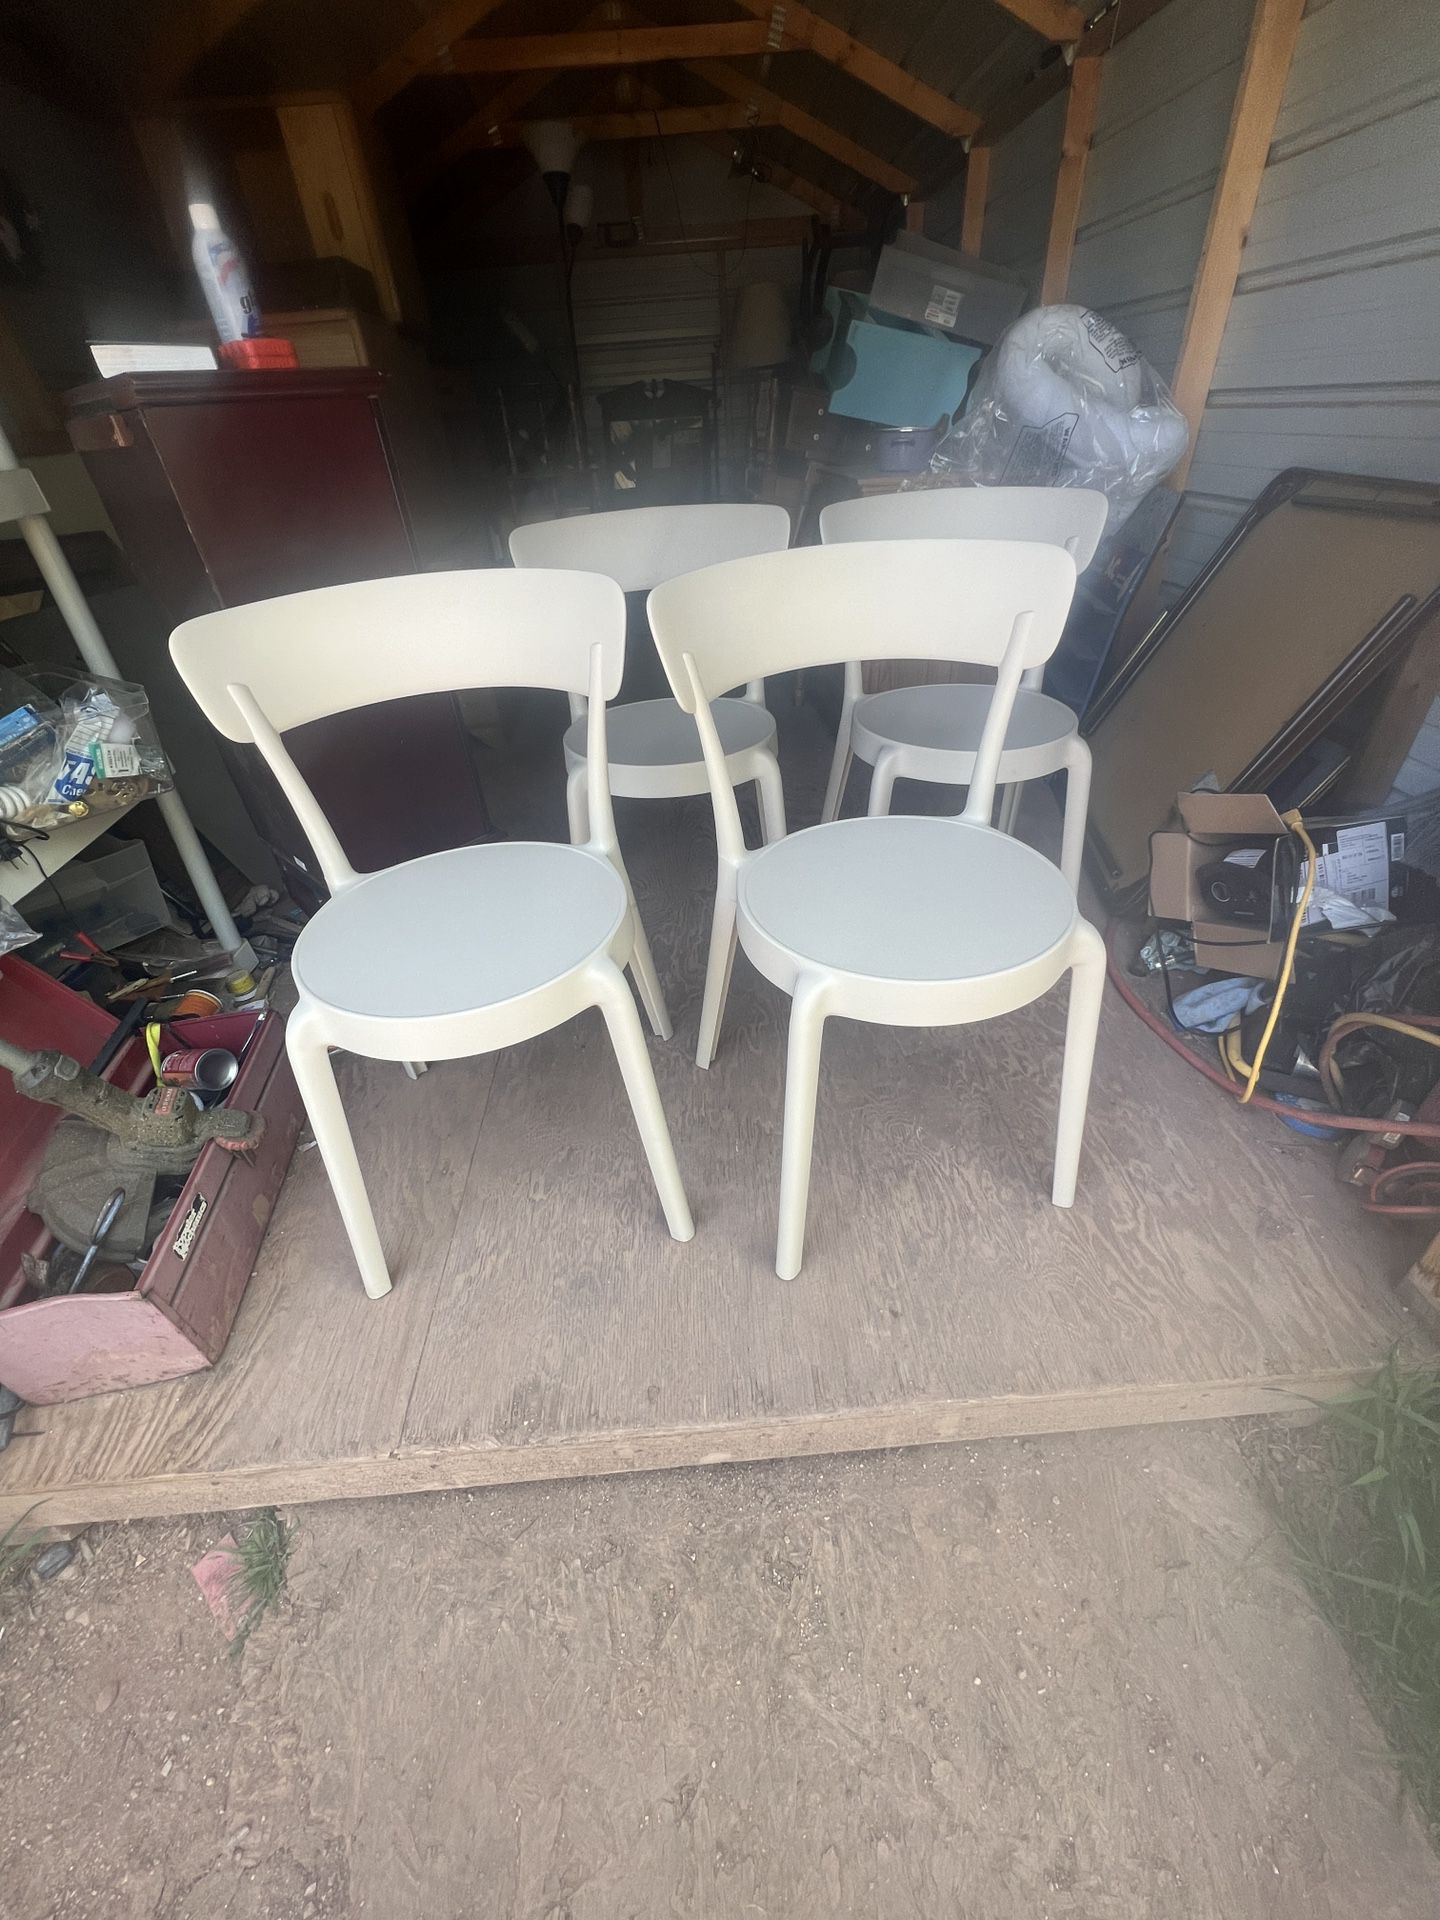 Nice Chairs I Am Selling A Set Of 4  In New Condition. Amazon Is Asking 90 For Each Chair